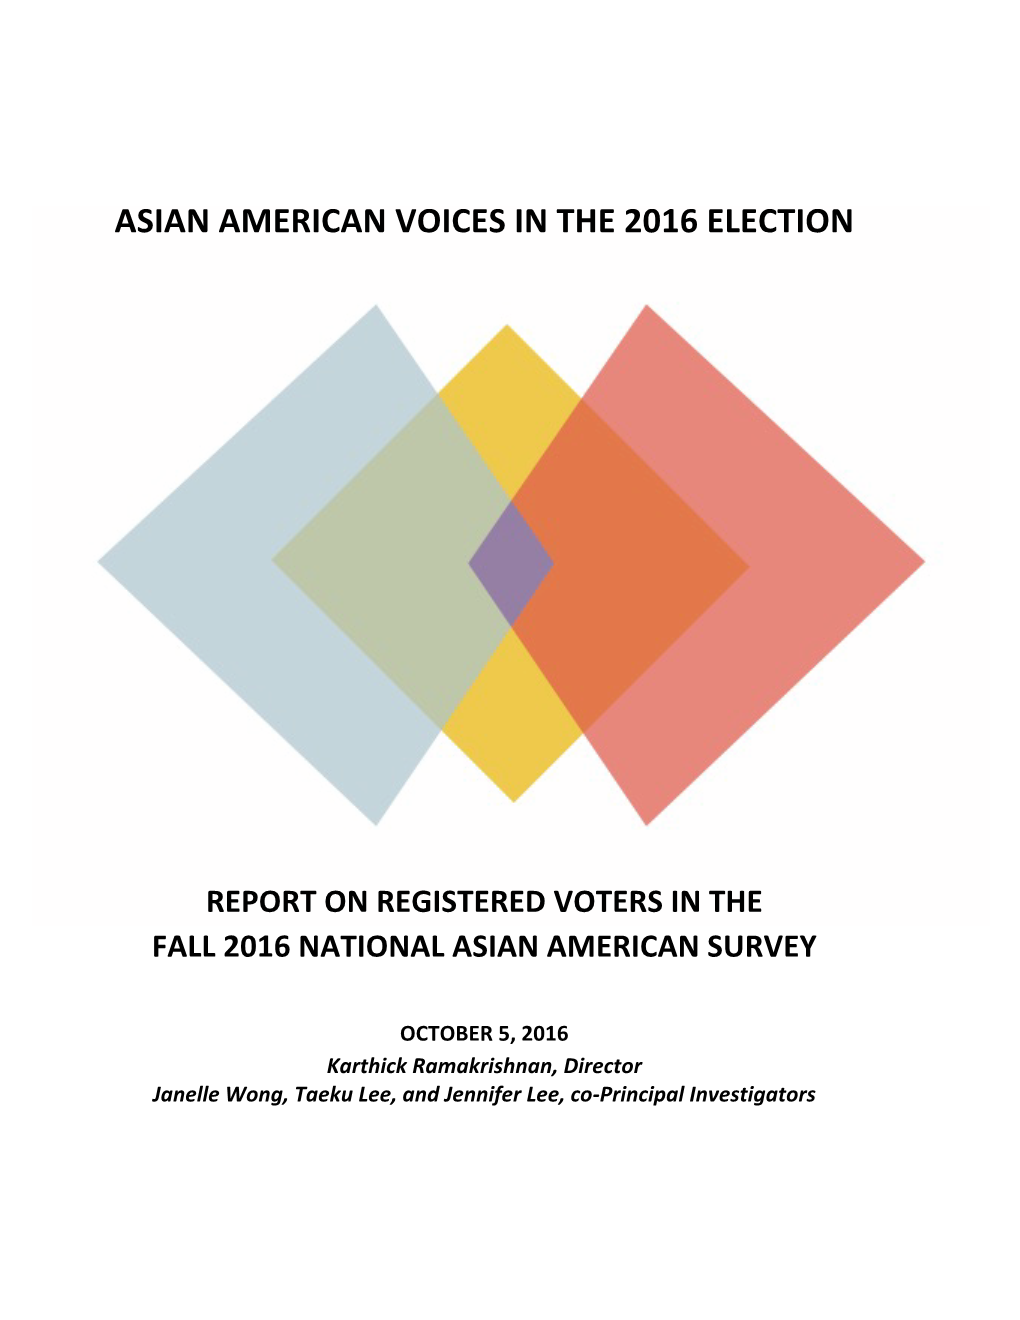 Asian American Voices in the 2016 Election